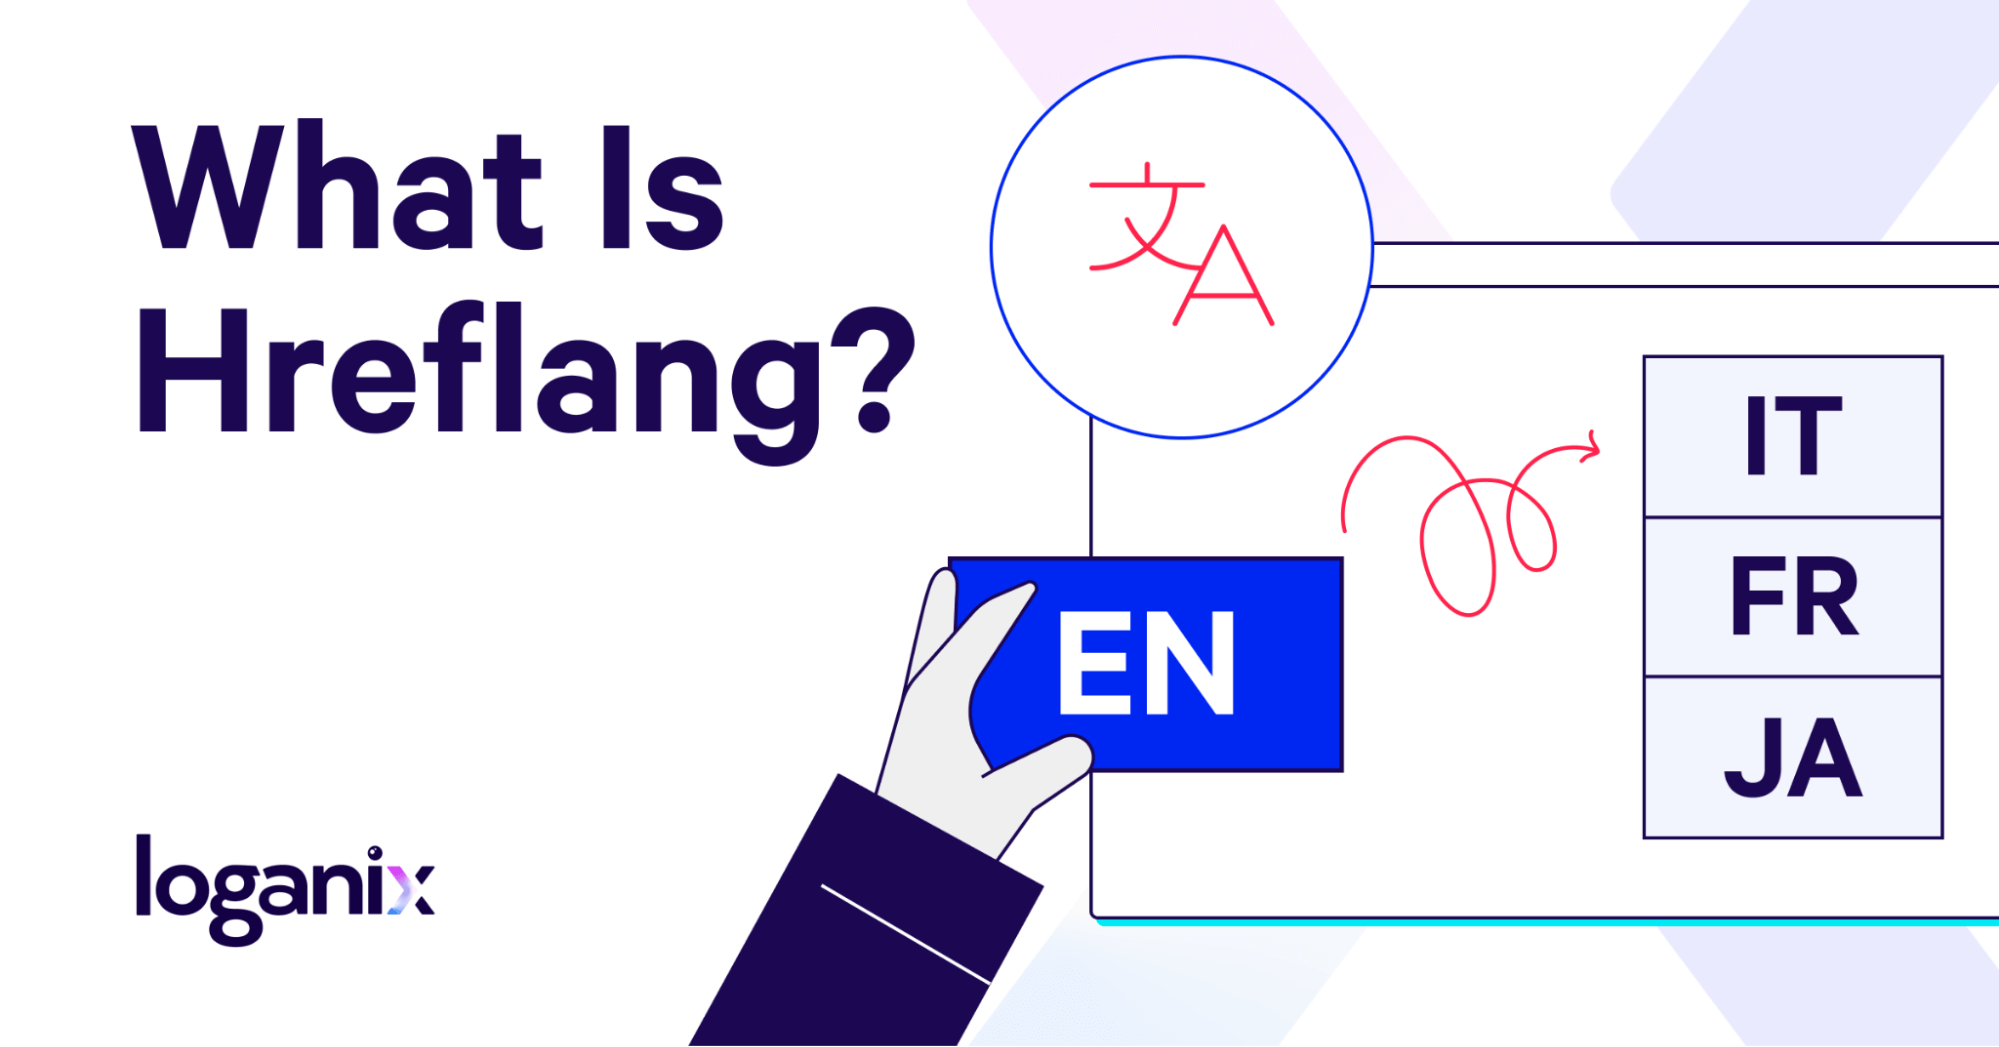 What Is Hreflang?